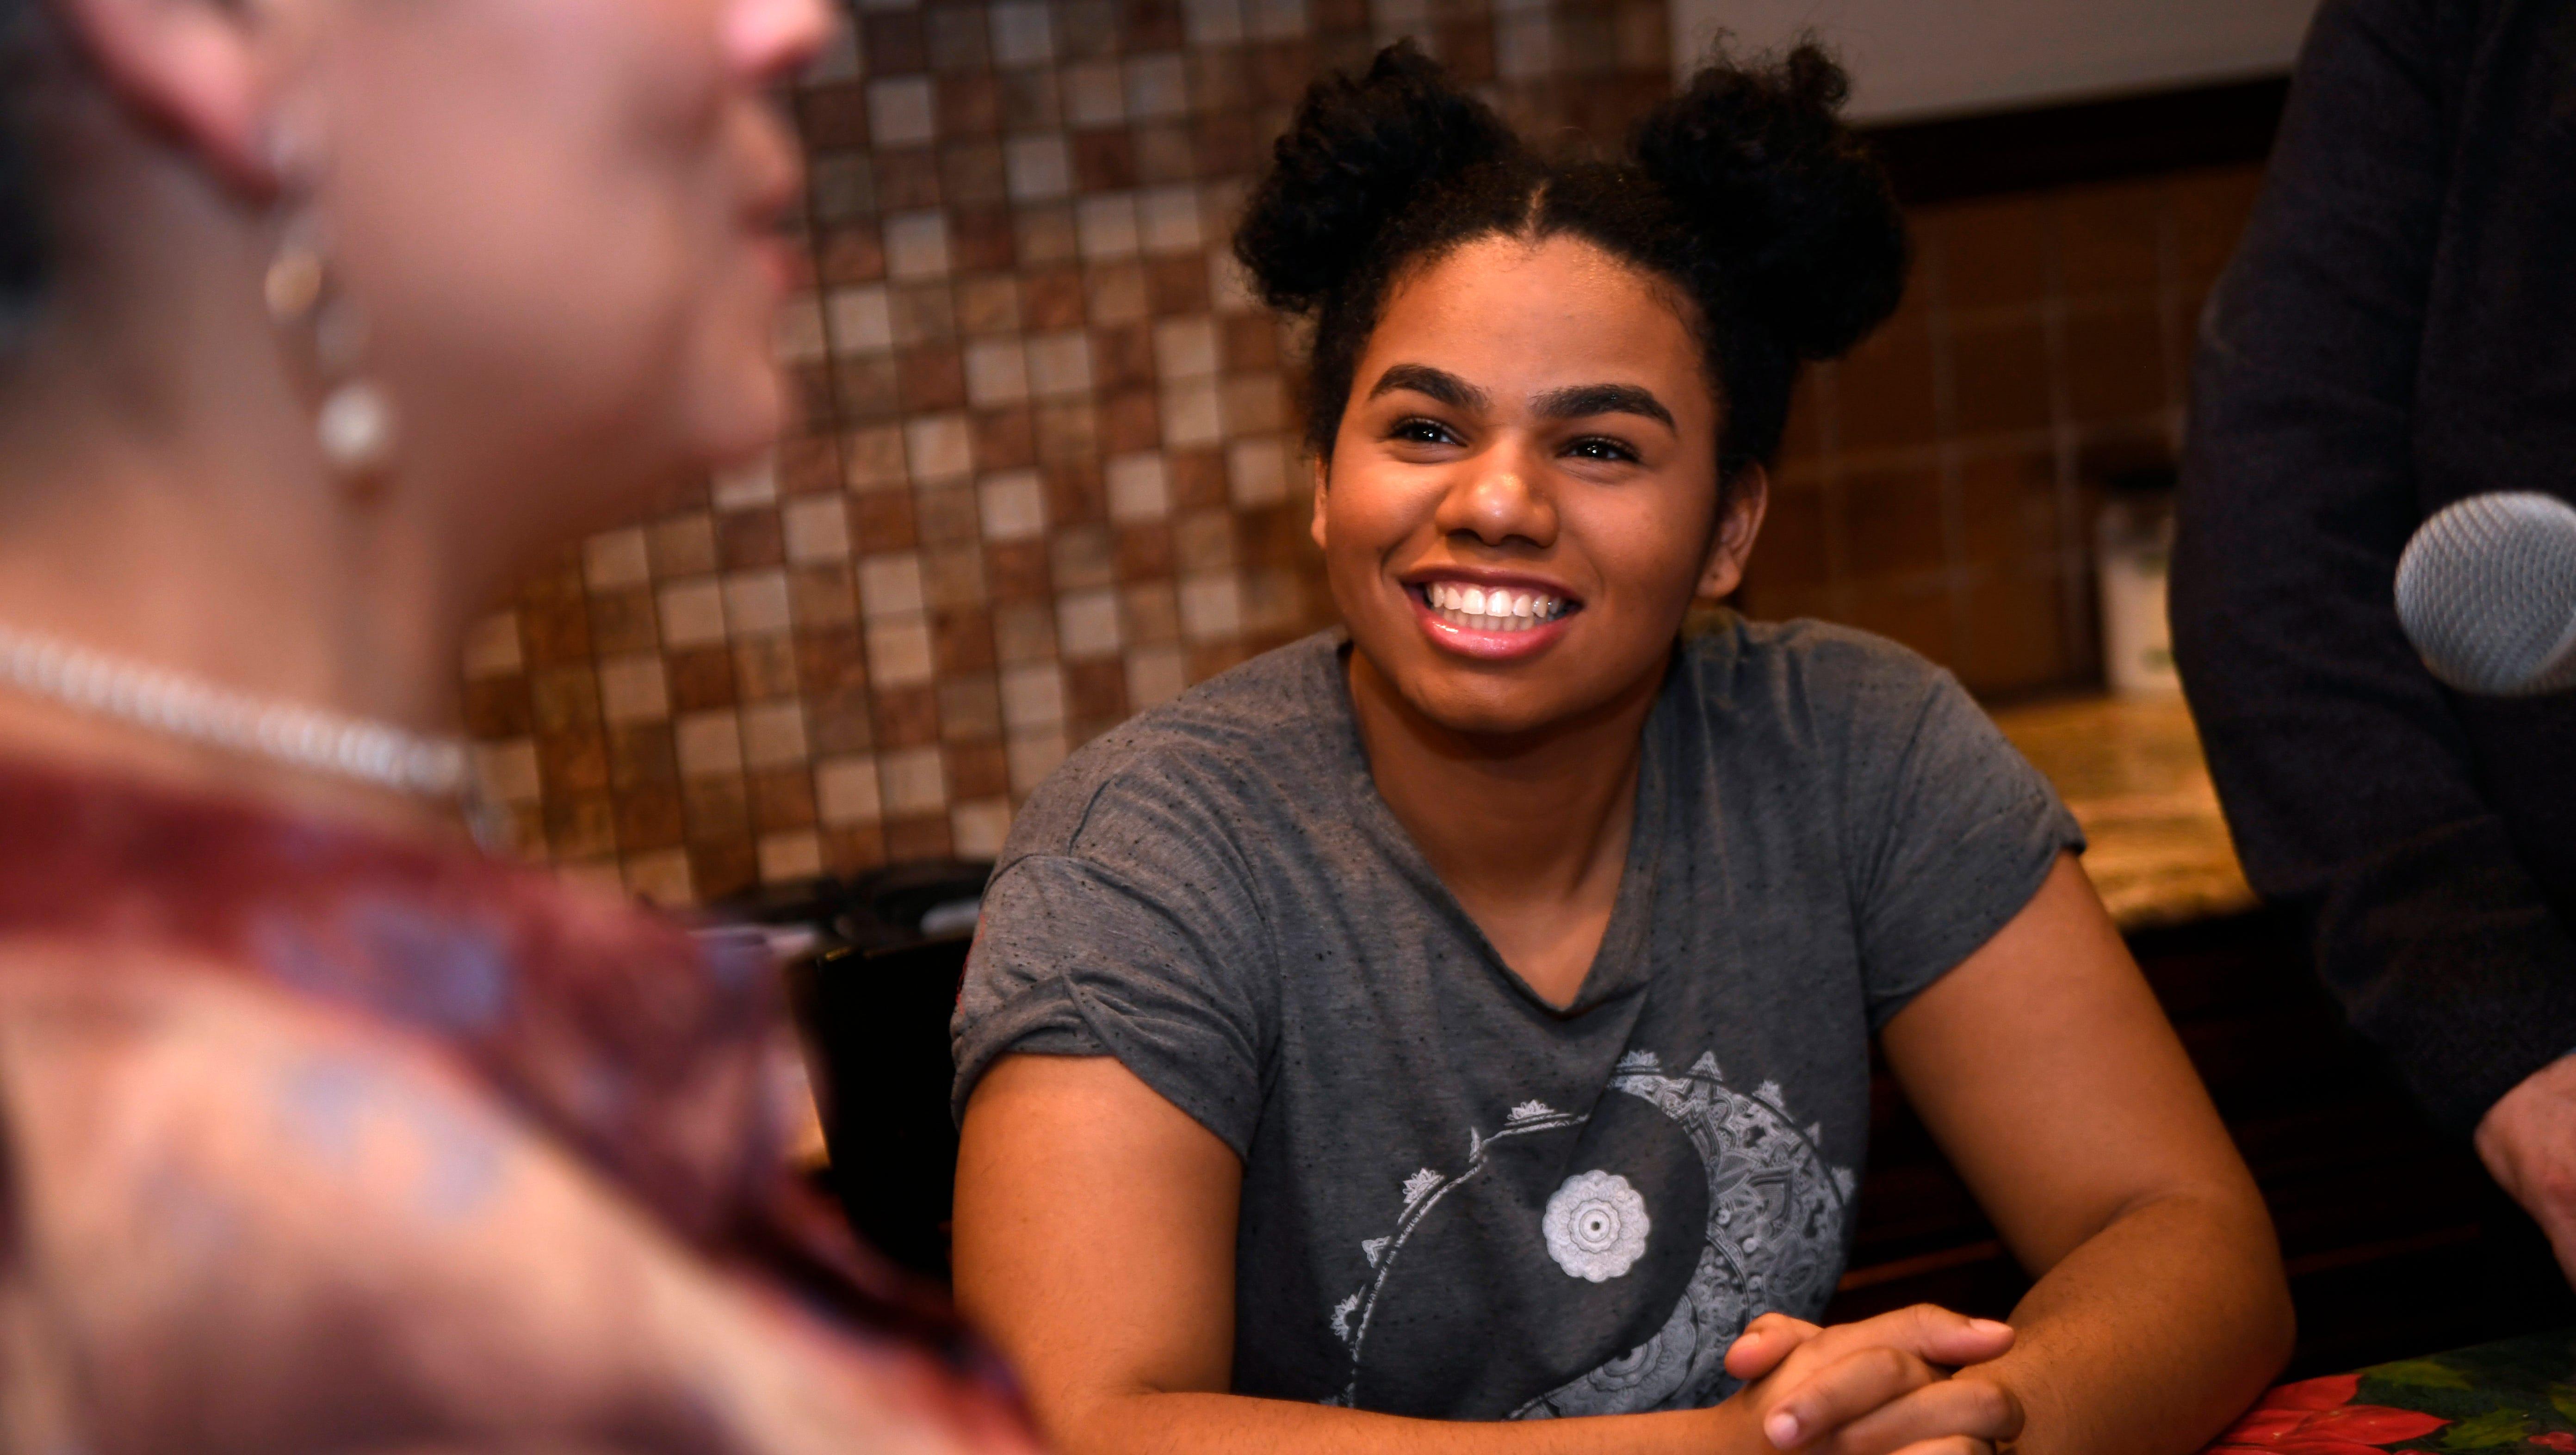 Wé McDonald talks to her mother, Jacqueline, in the kitchen of their Paterson house.